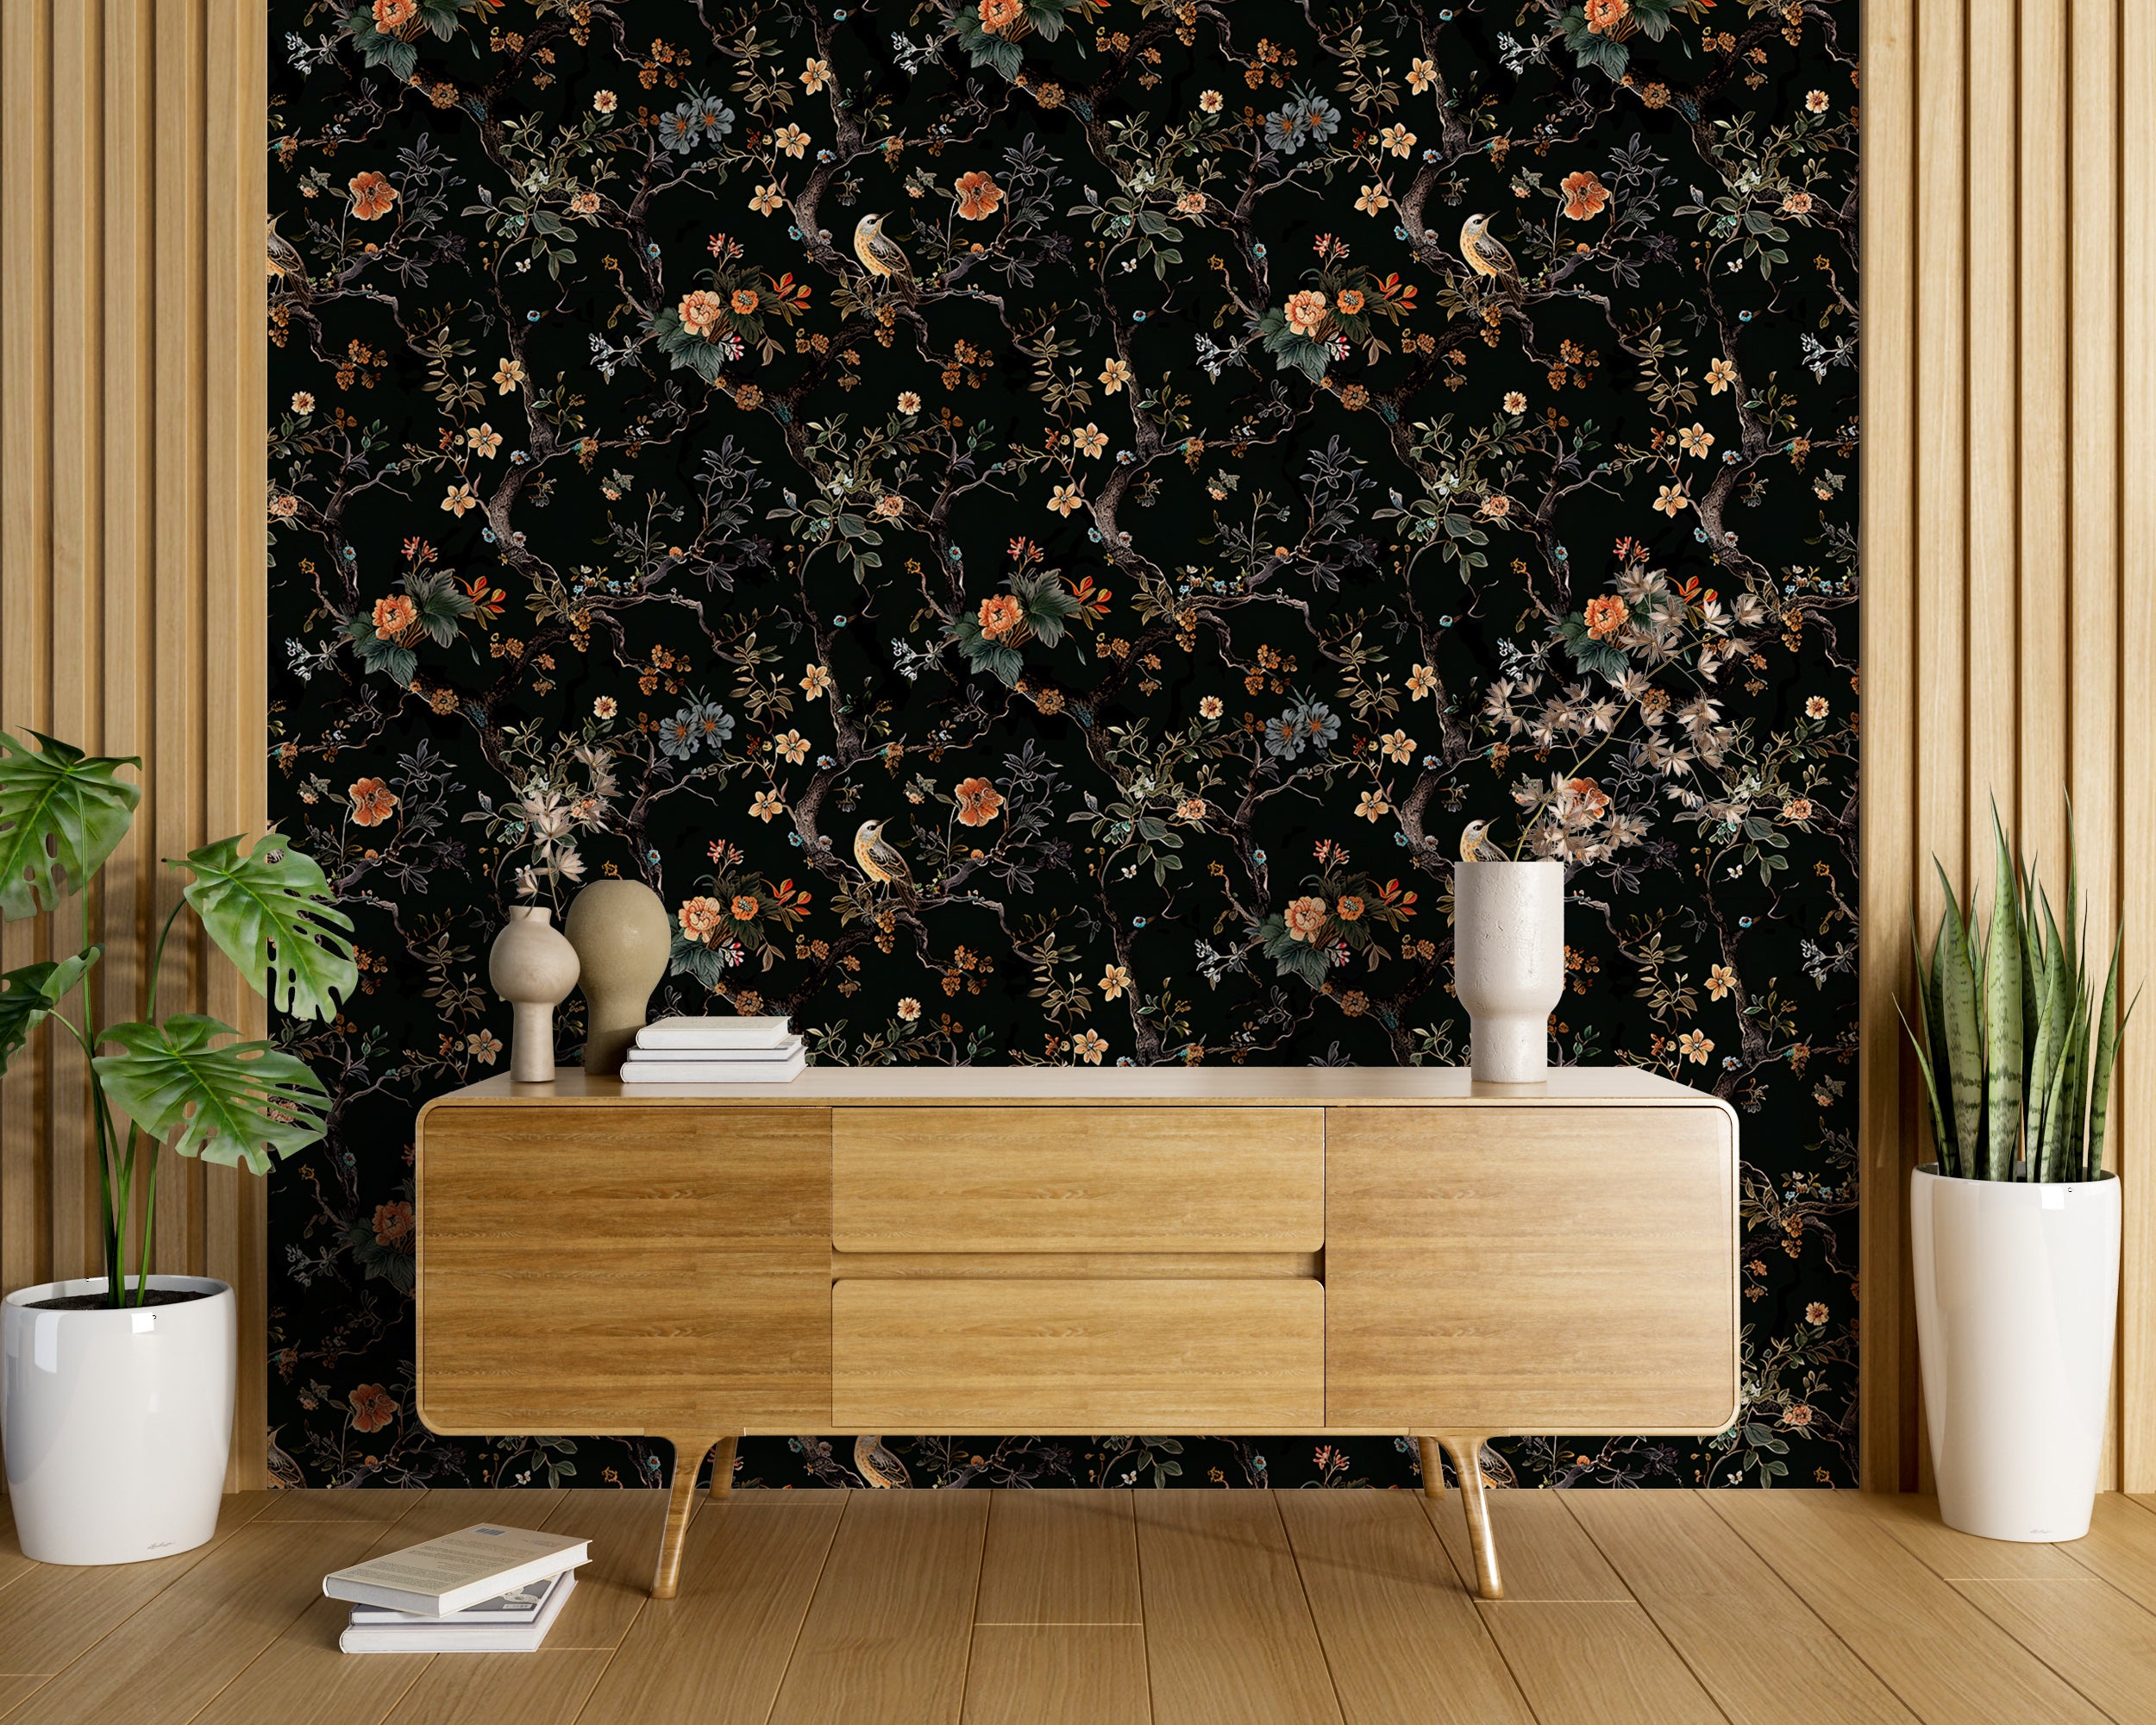 Dark Chinoiserie Wallpaper, Peel and Stick Flowers Decal, Birds and Flowers Removable Wallpaper, Black Botanical Wall Art